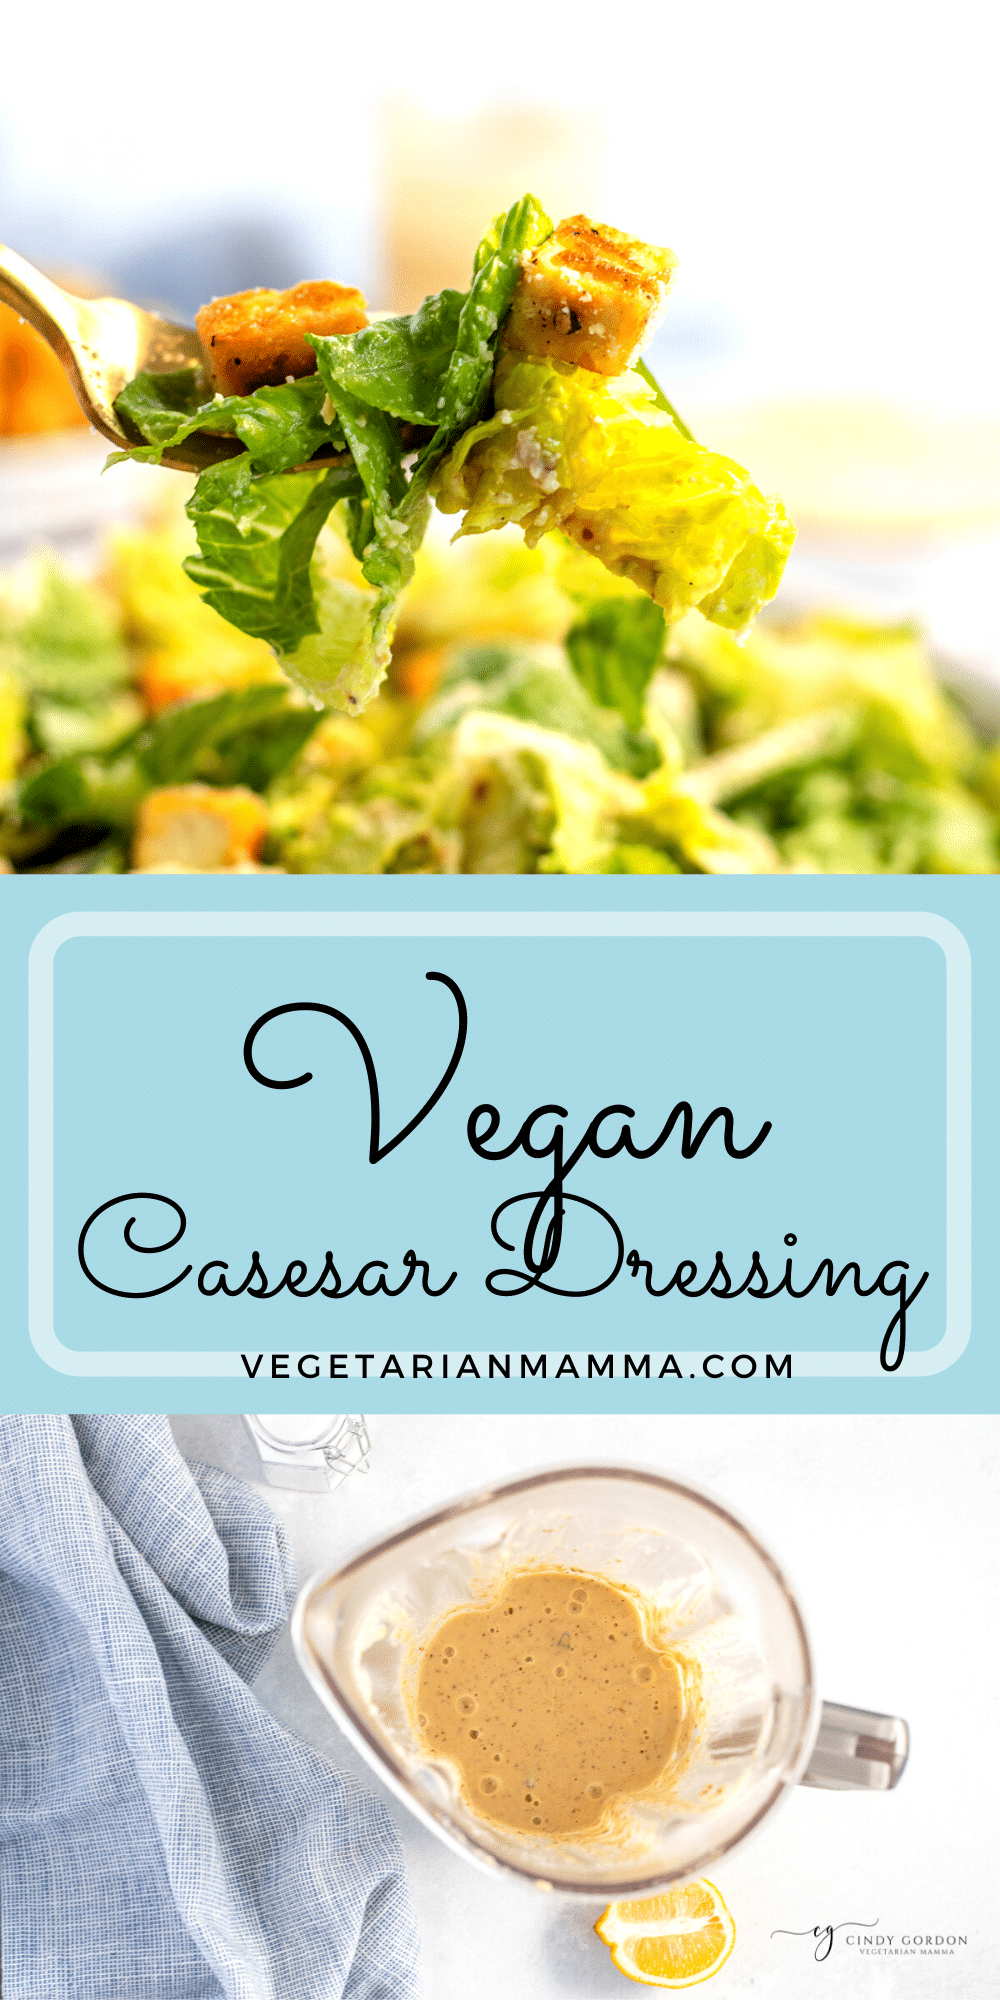 Vegan Caesar dressing is creamy, tangy, and totally plant-based! Whip up this easy vegan salad dressing recipe in just 5 minutes. Perfect for meal prep.